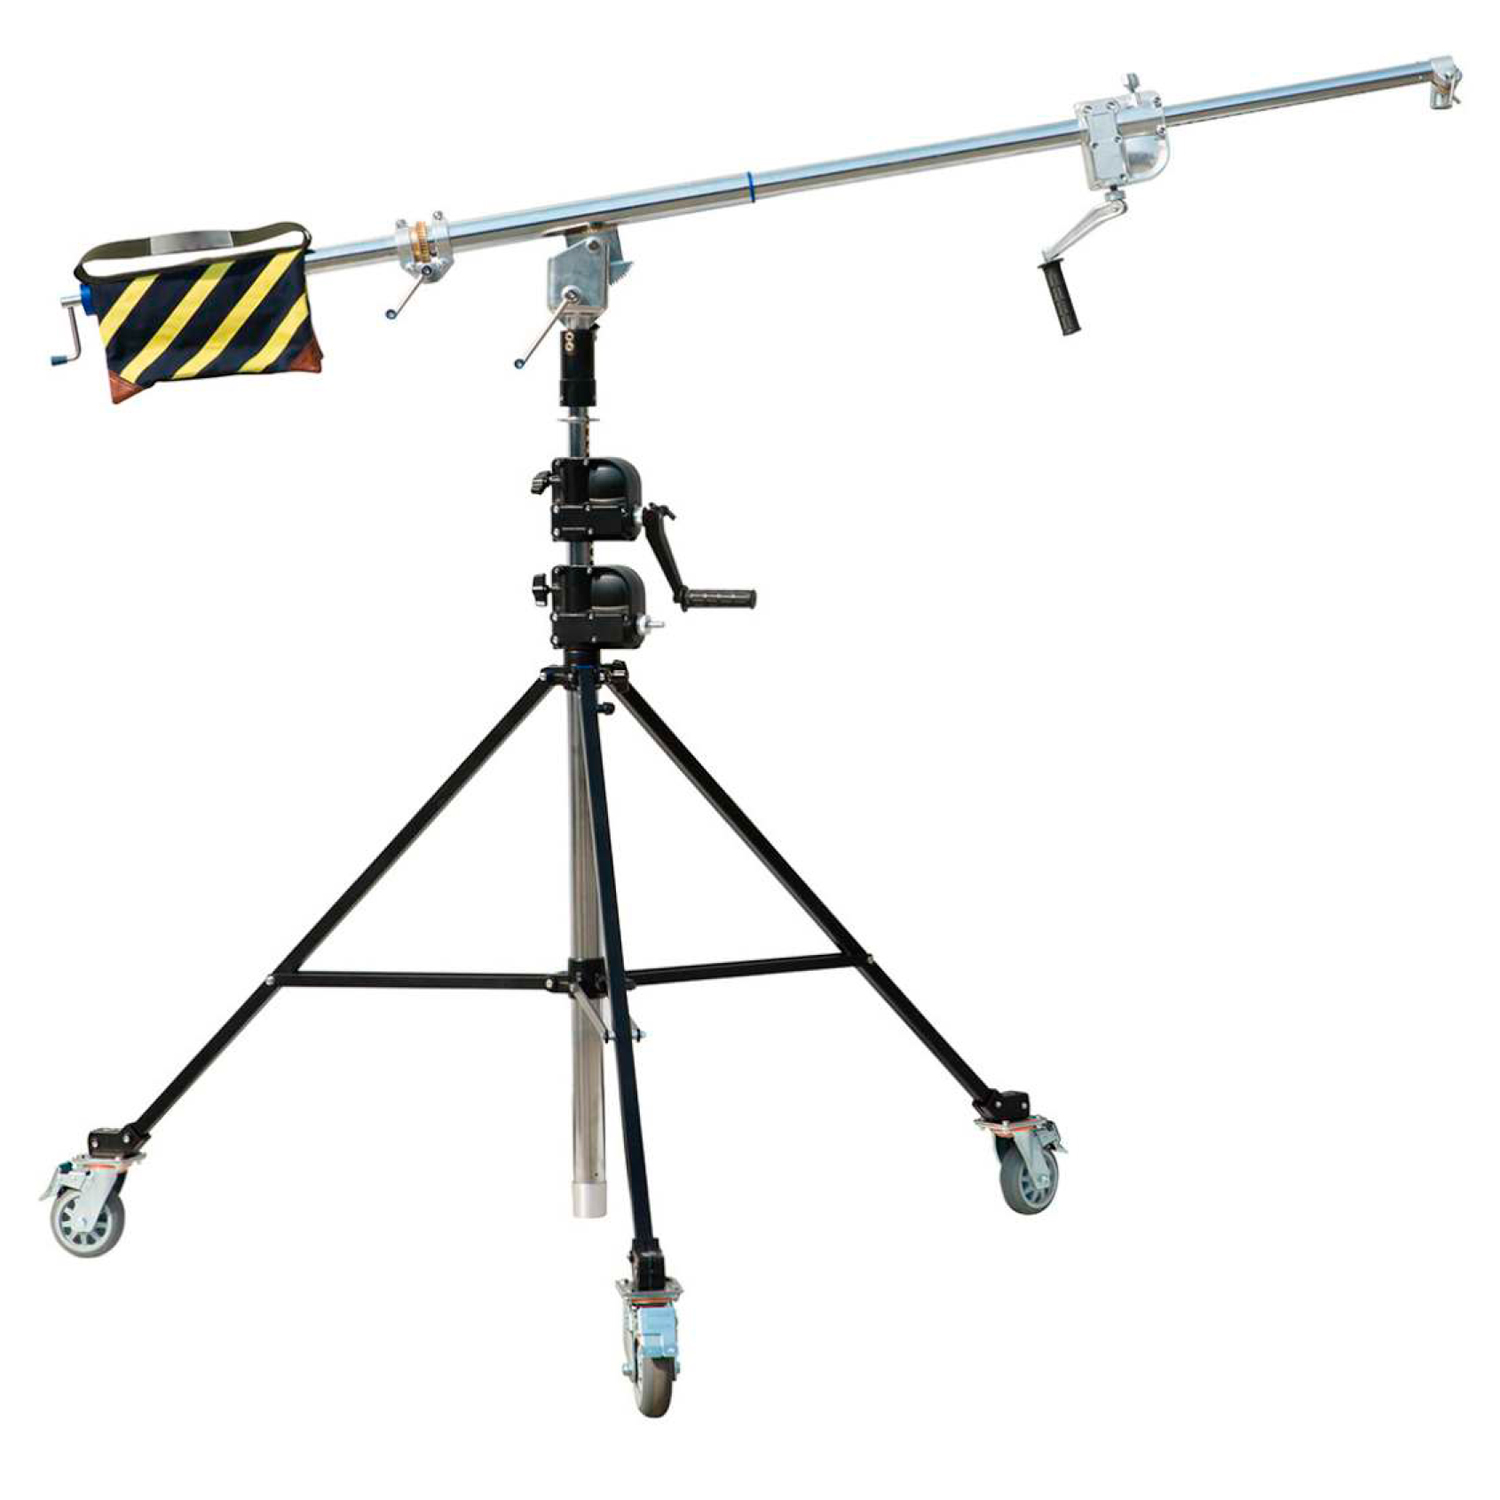 Boom stand kits with cranking handle and wheels